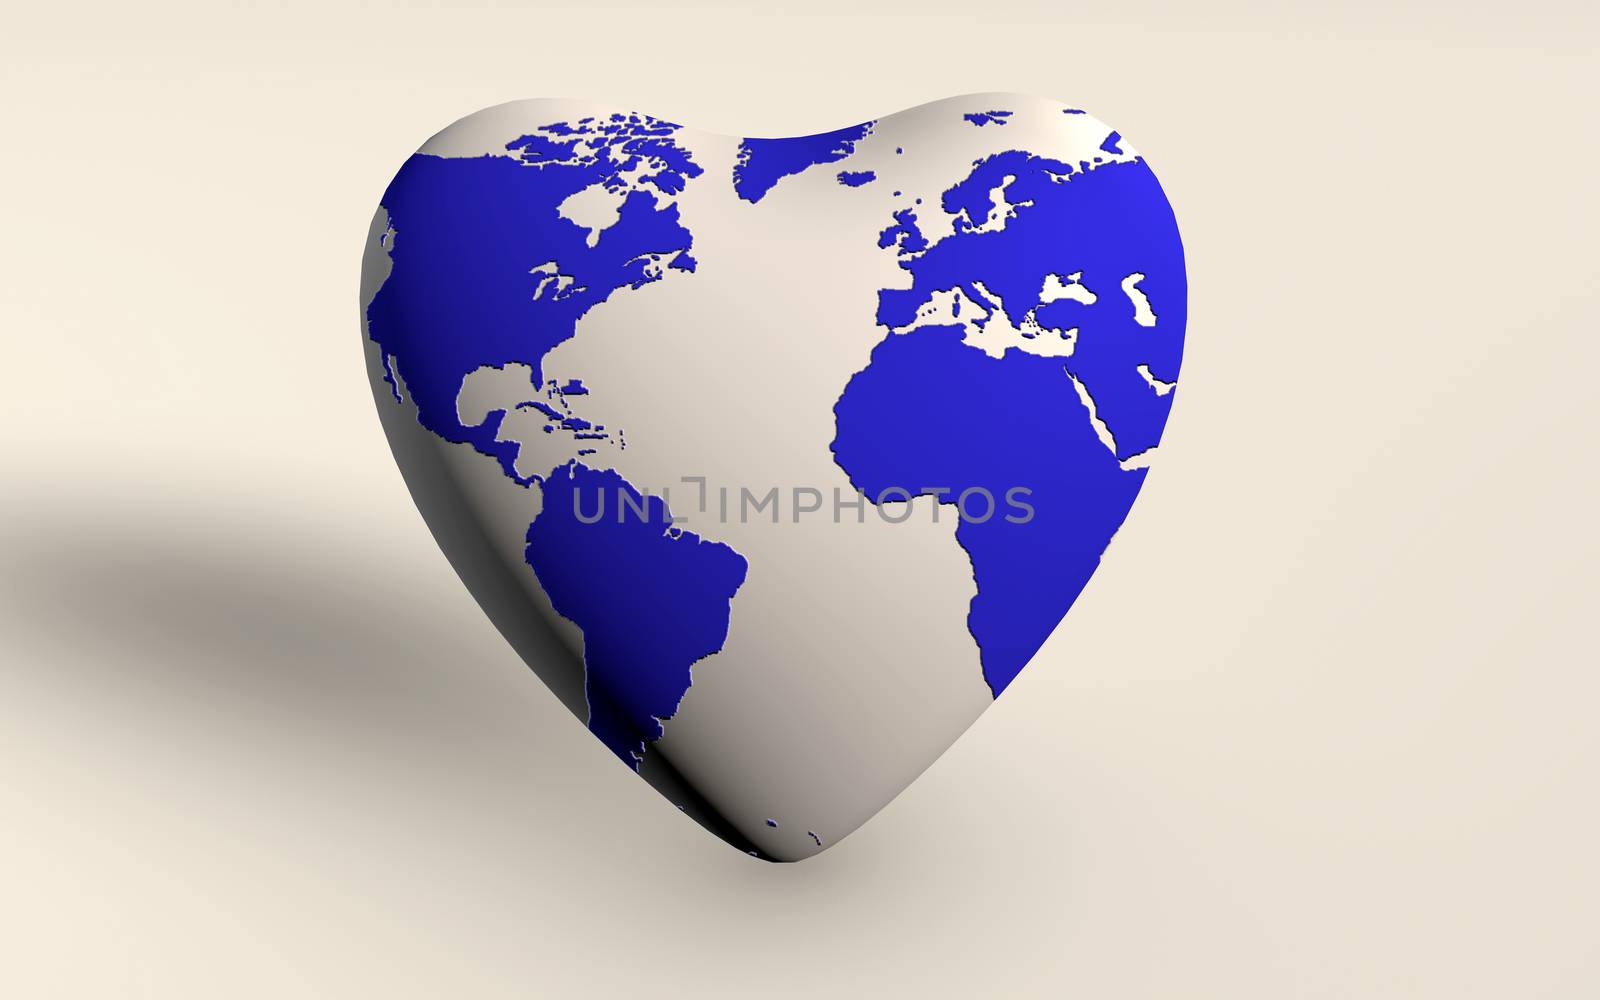 The Earth Globe in a Heart shape with a blue world map. Save the Earth, Keep the Planet safe, Environment, Nature, concept. 3D rendered isolated on white background.